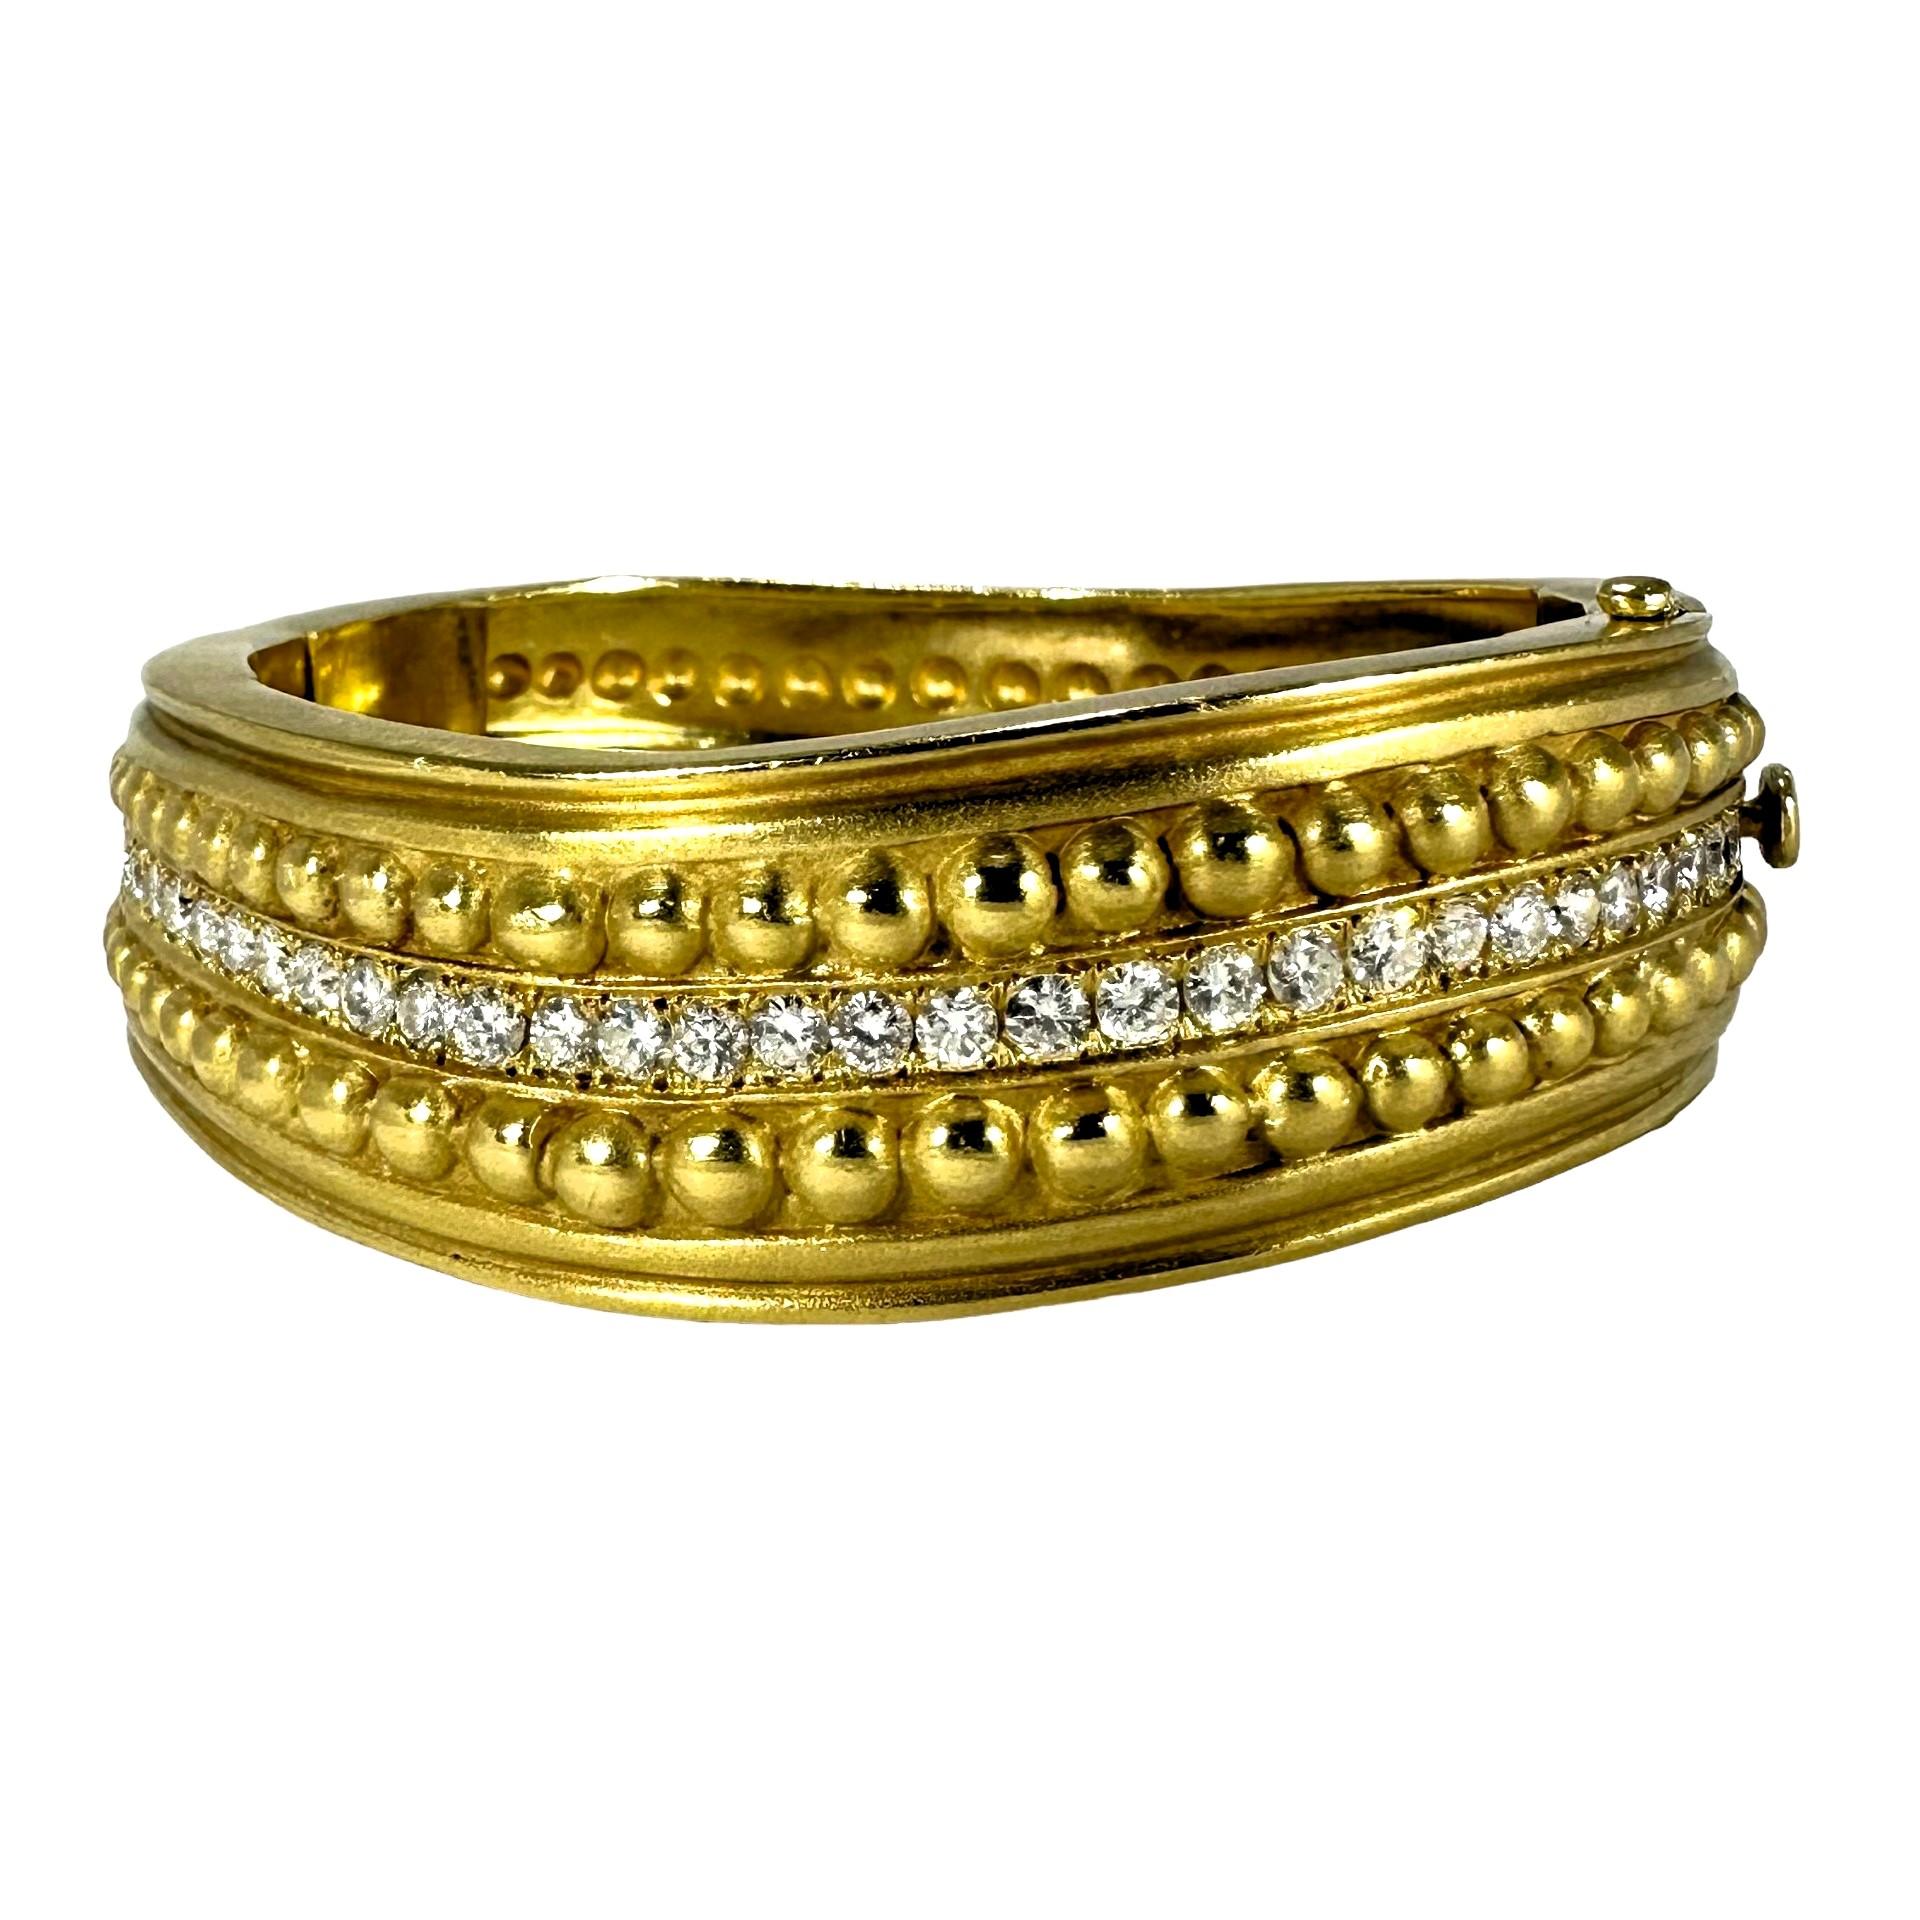 This dimensional, and substantial vintage 18k yellow gold and diamond cuff bracelet by highly regarded designer, Vahe Naltchayan is finished over all forward surfaces in a subtle satin finish. It's  slightly undulating design creates a sense of